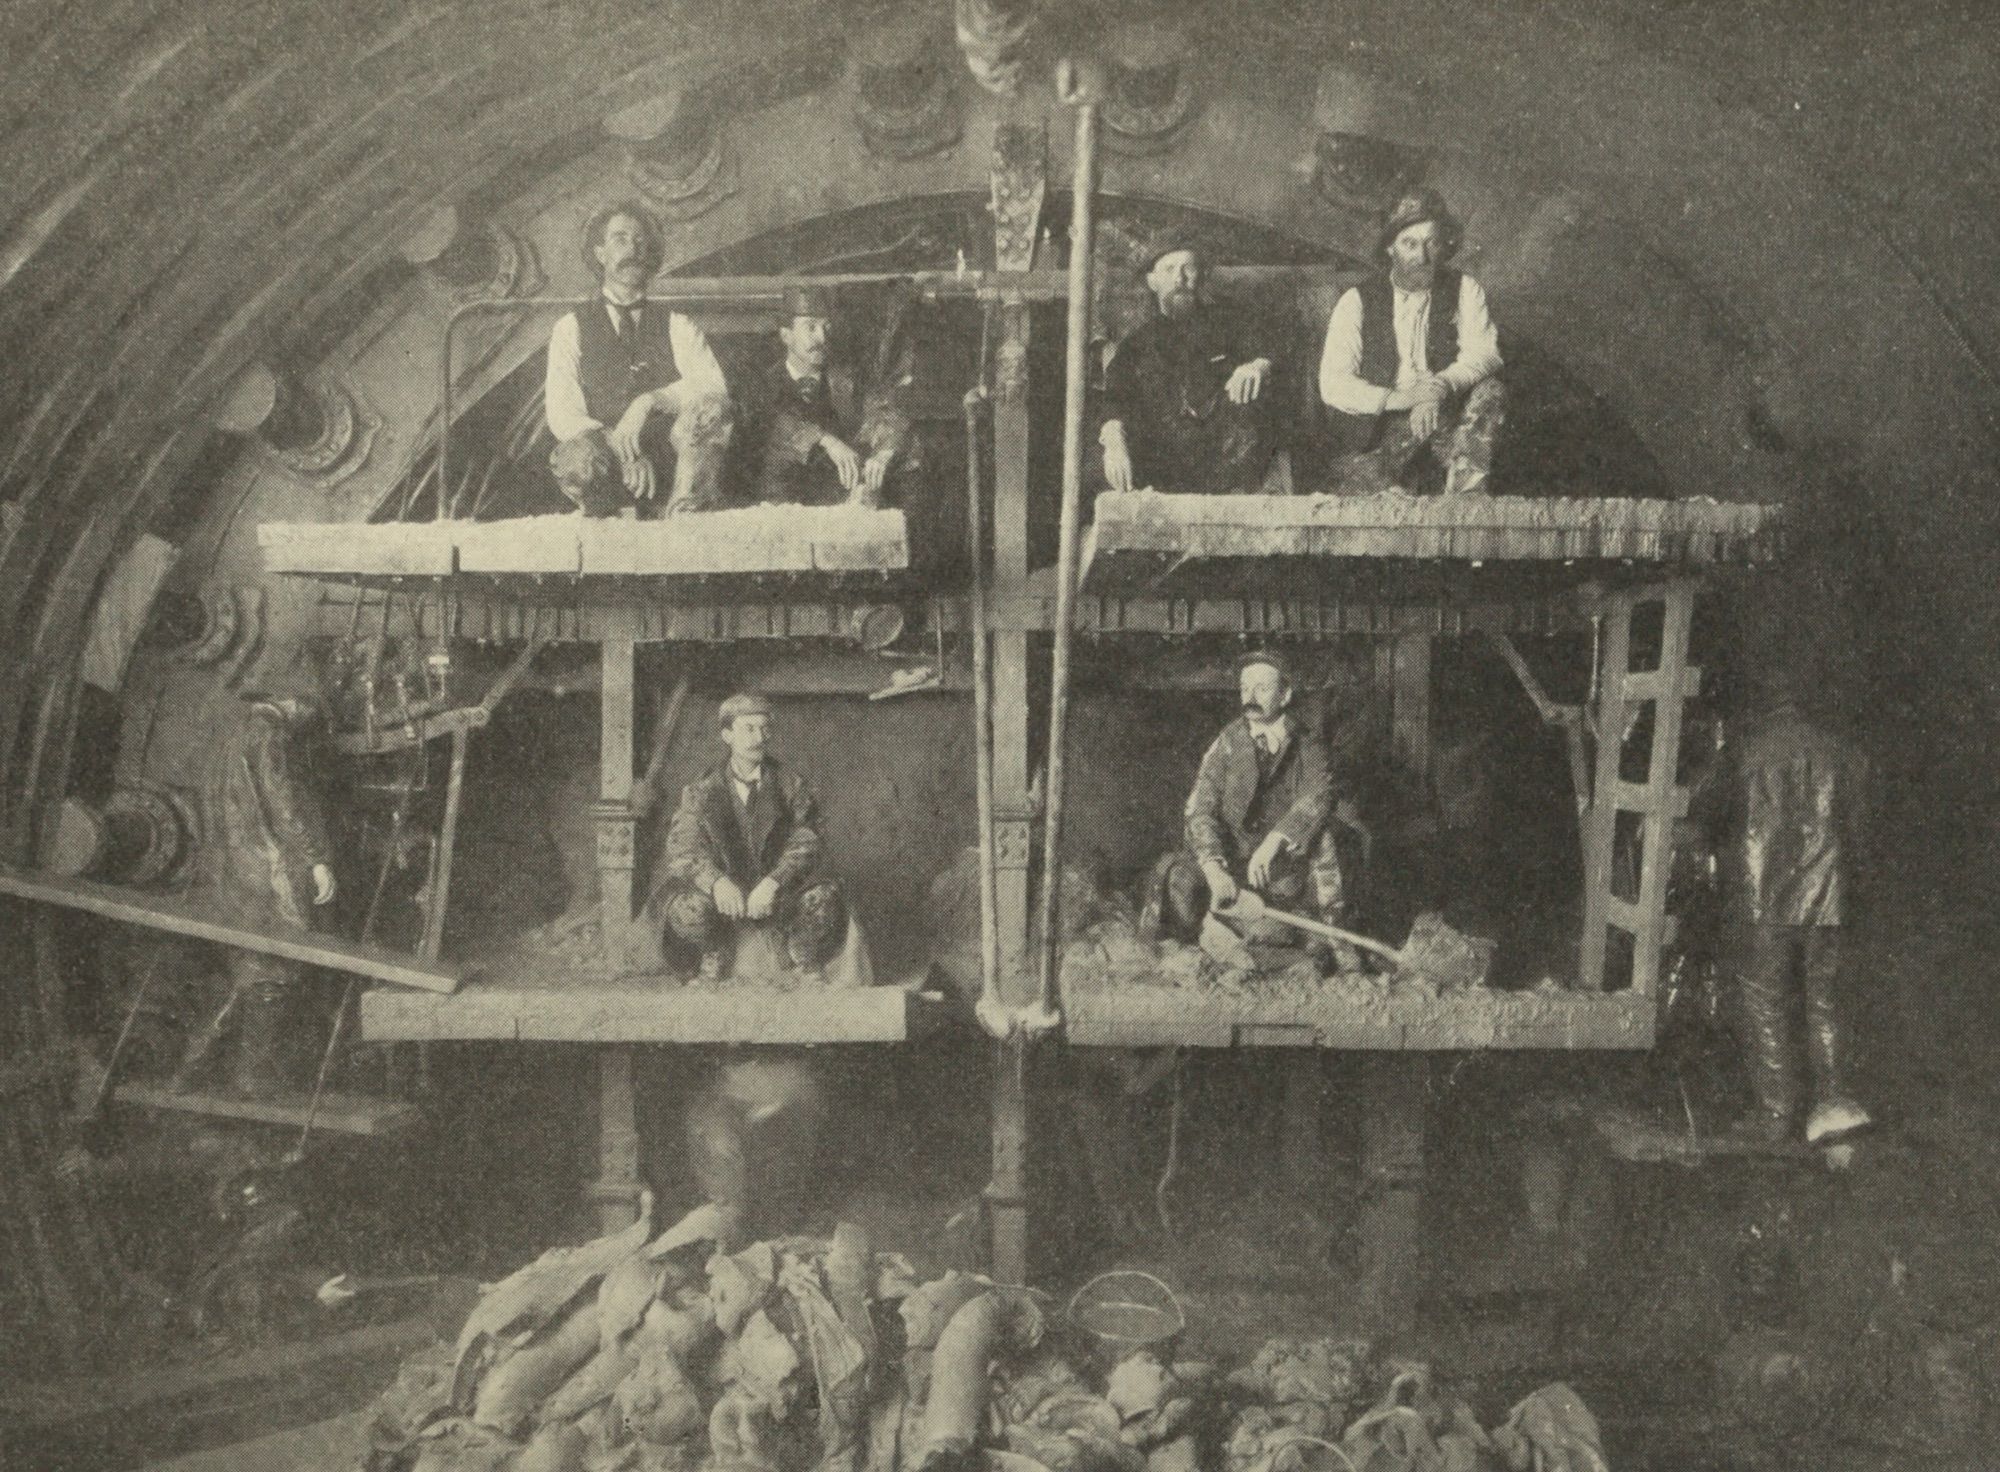 Glimpses into the 19th Century London Sewage System: A Historical Perspective